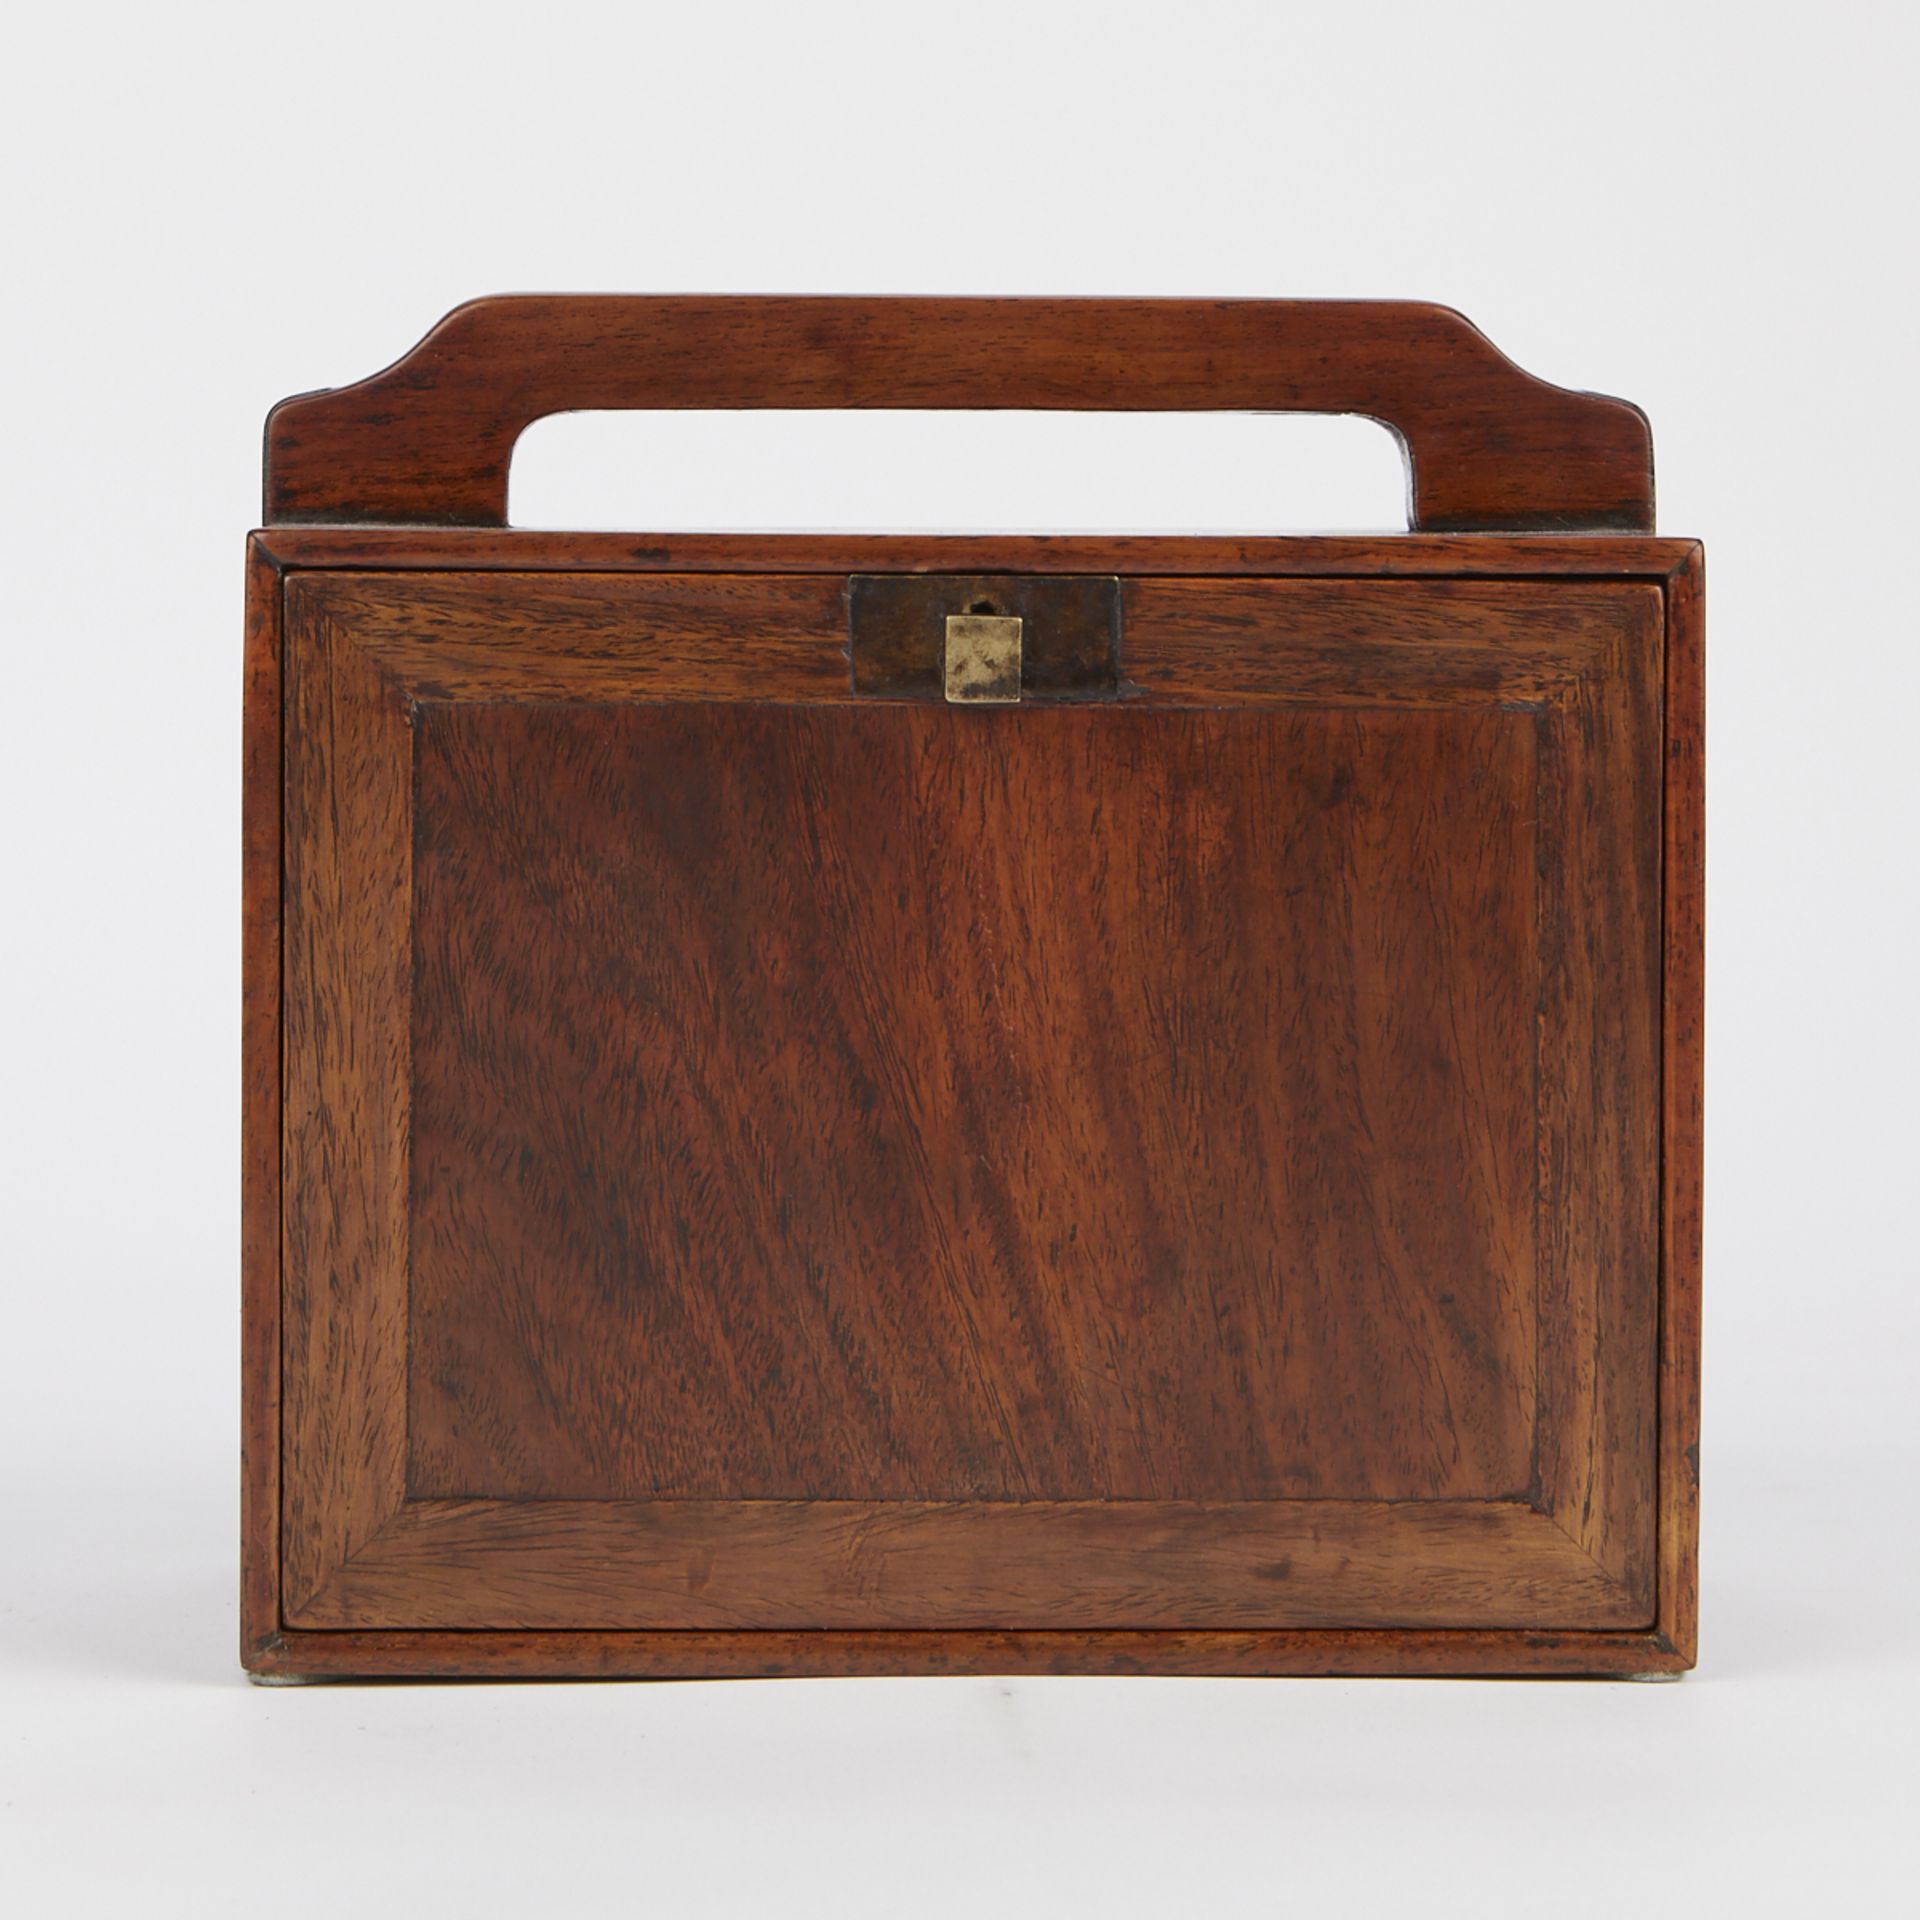 Chinese Huanghuali Rosewood Doctor's Box - Image 3 of 7